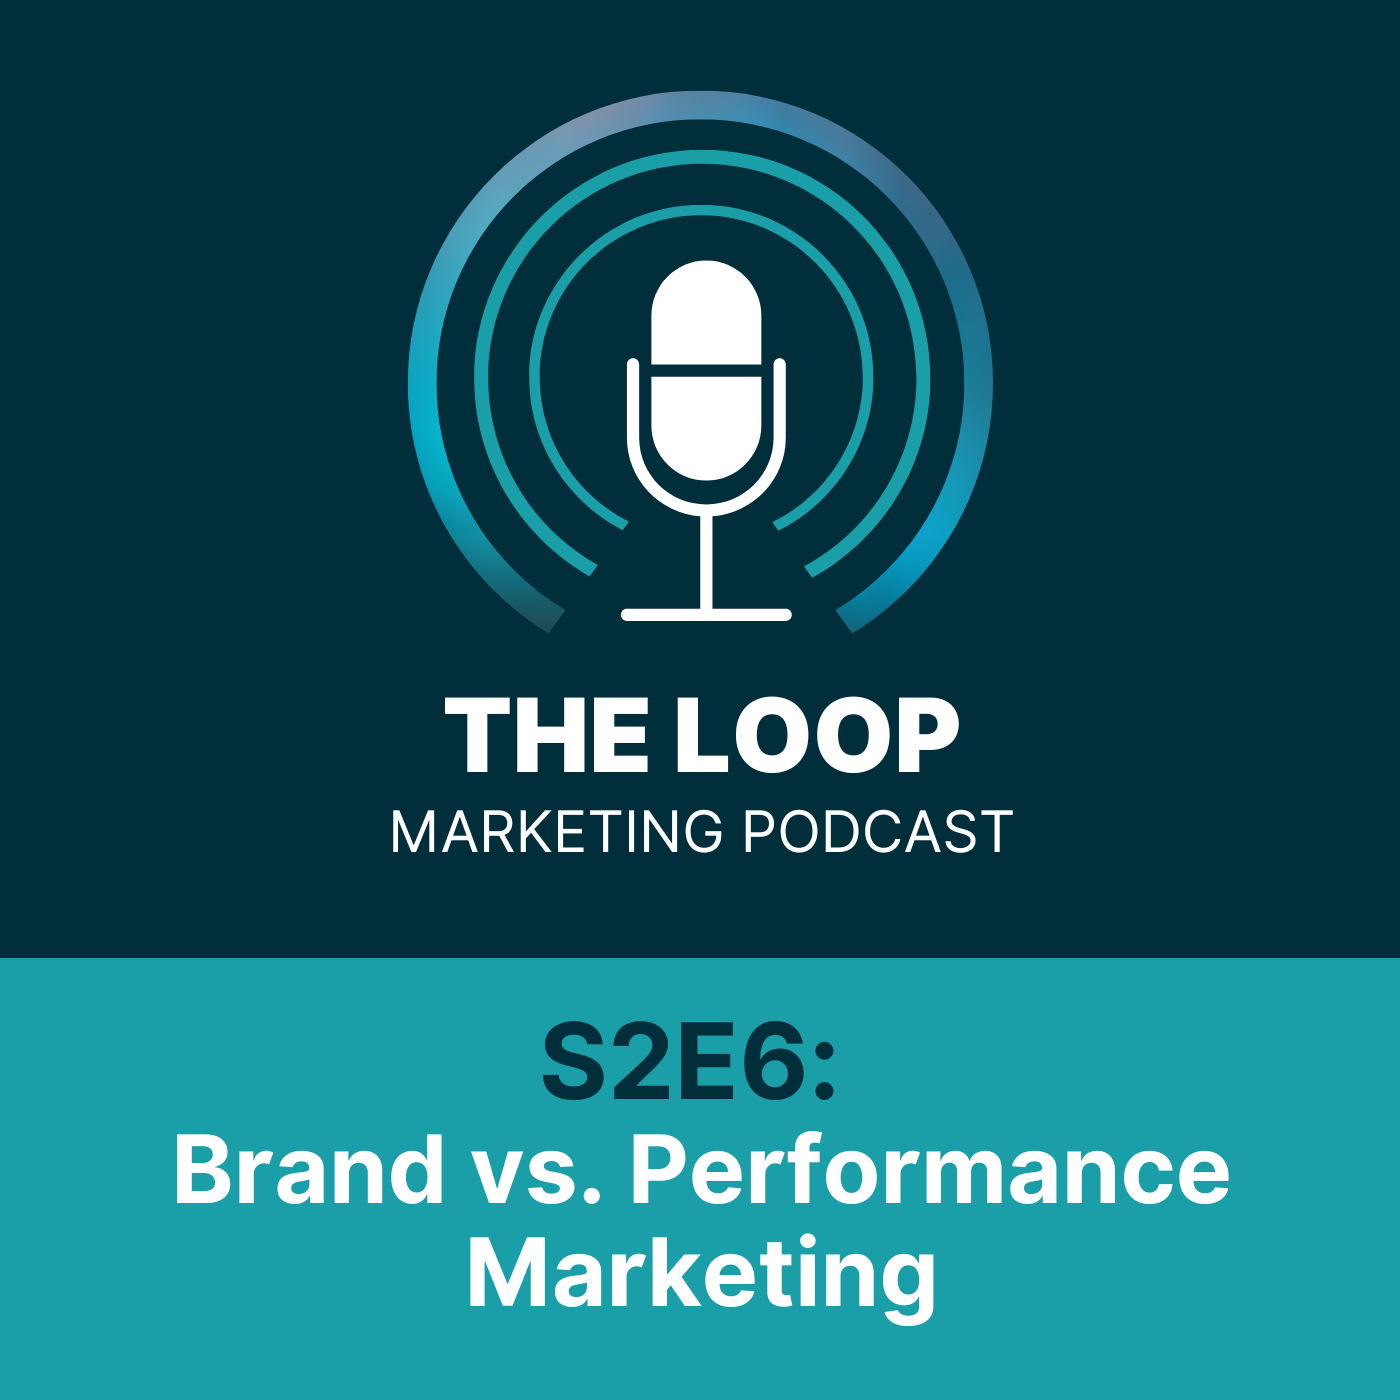 Brand vs. Performance Marketing with Bread and Butter Wines